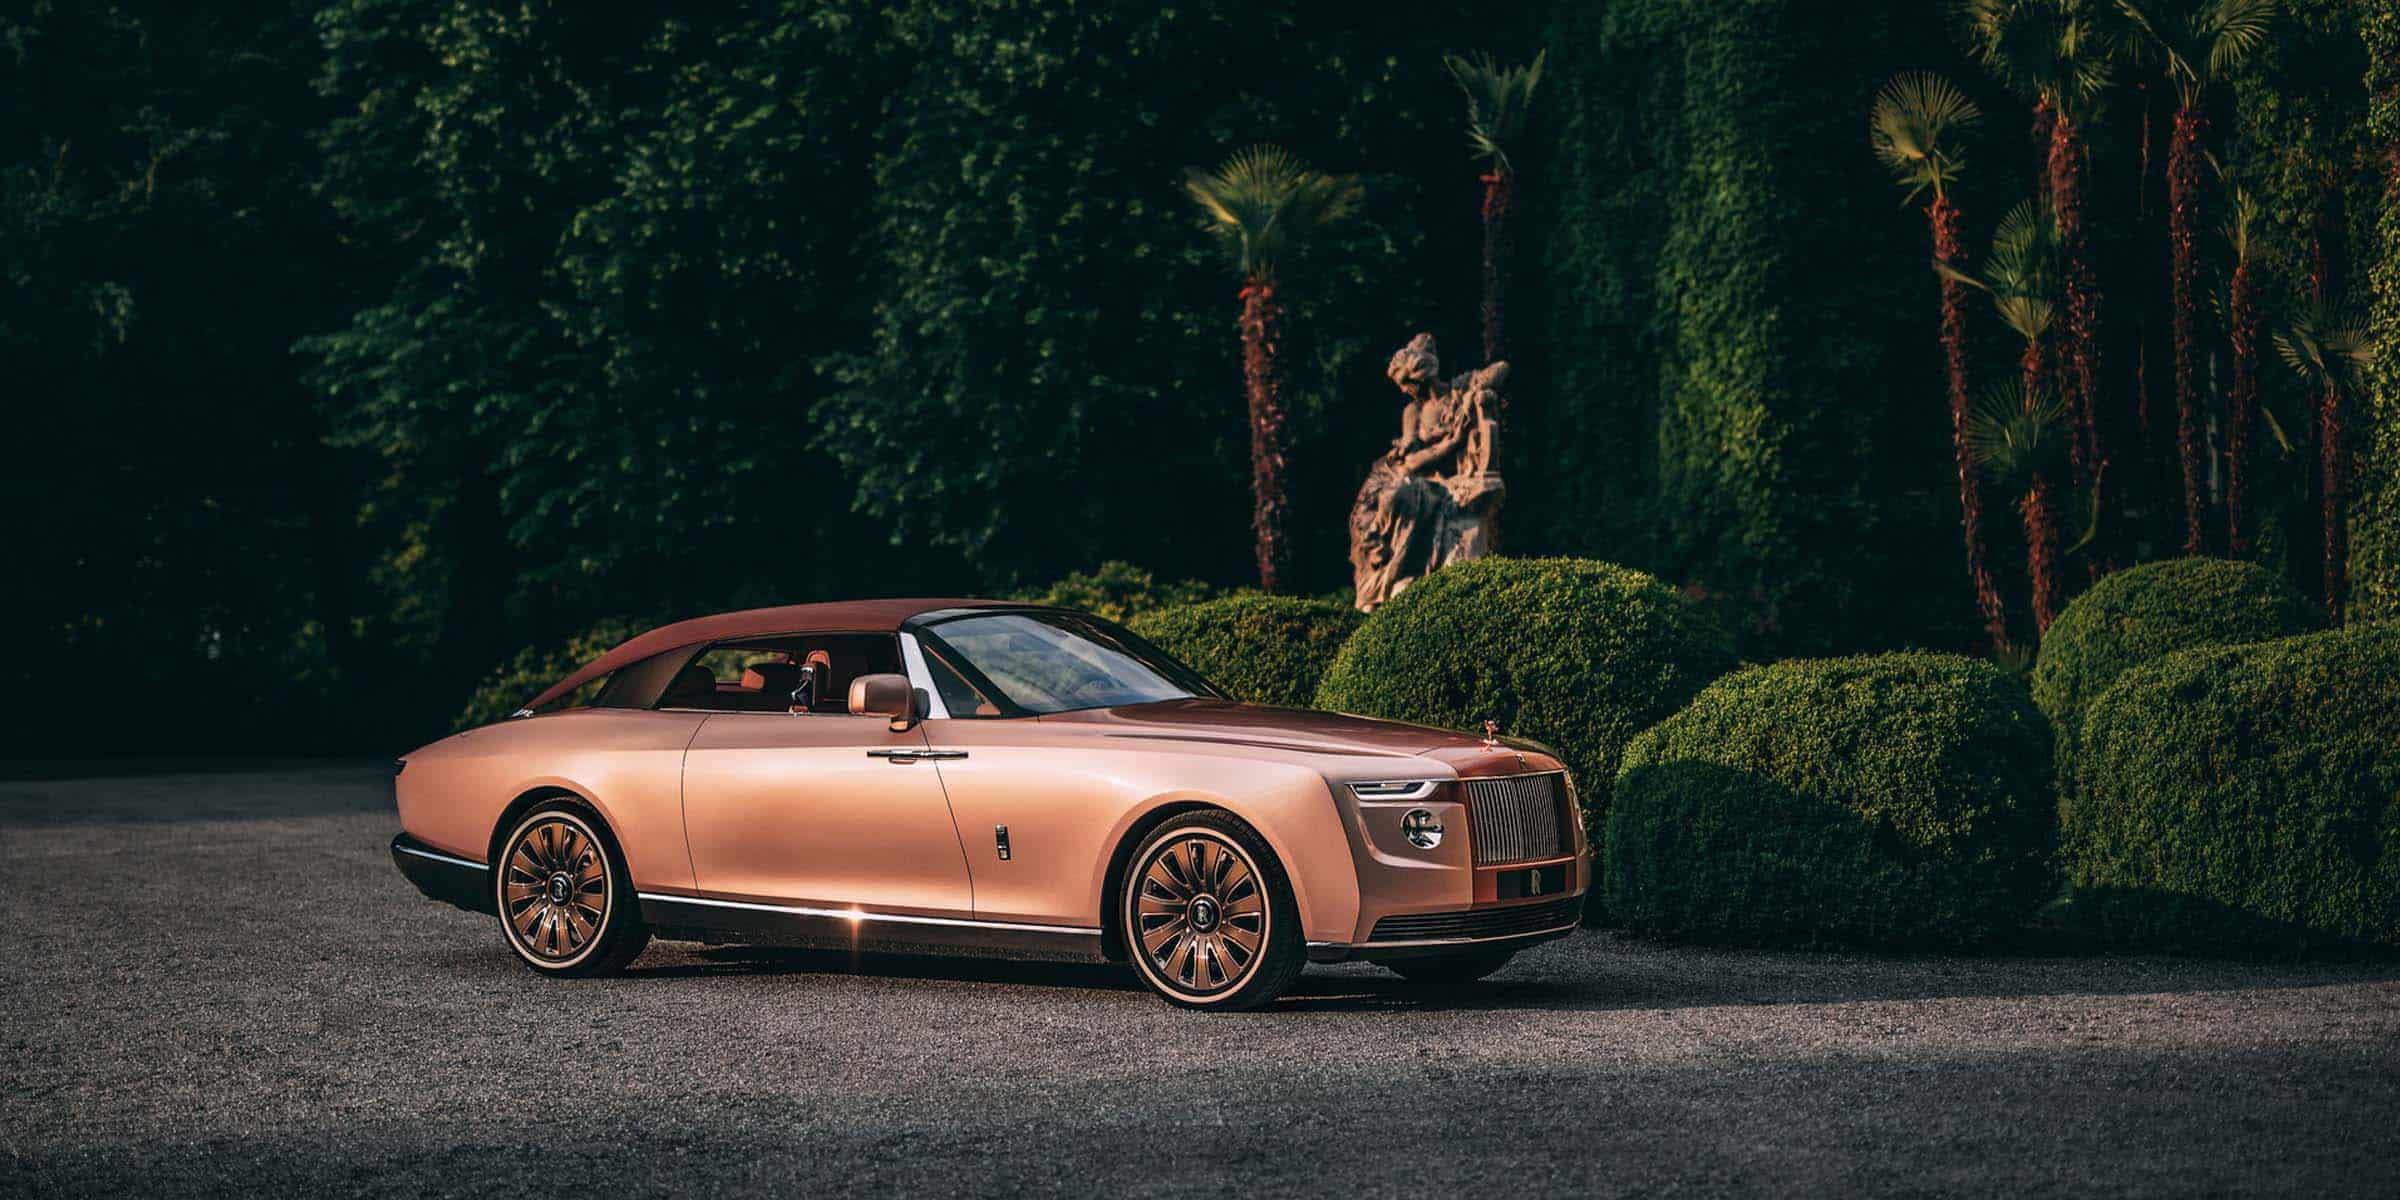 La Rose Noire RollsRoyce Is Worlds Most Expensive Car With a 30 Million  Price Tag  autoevolution